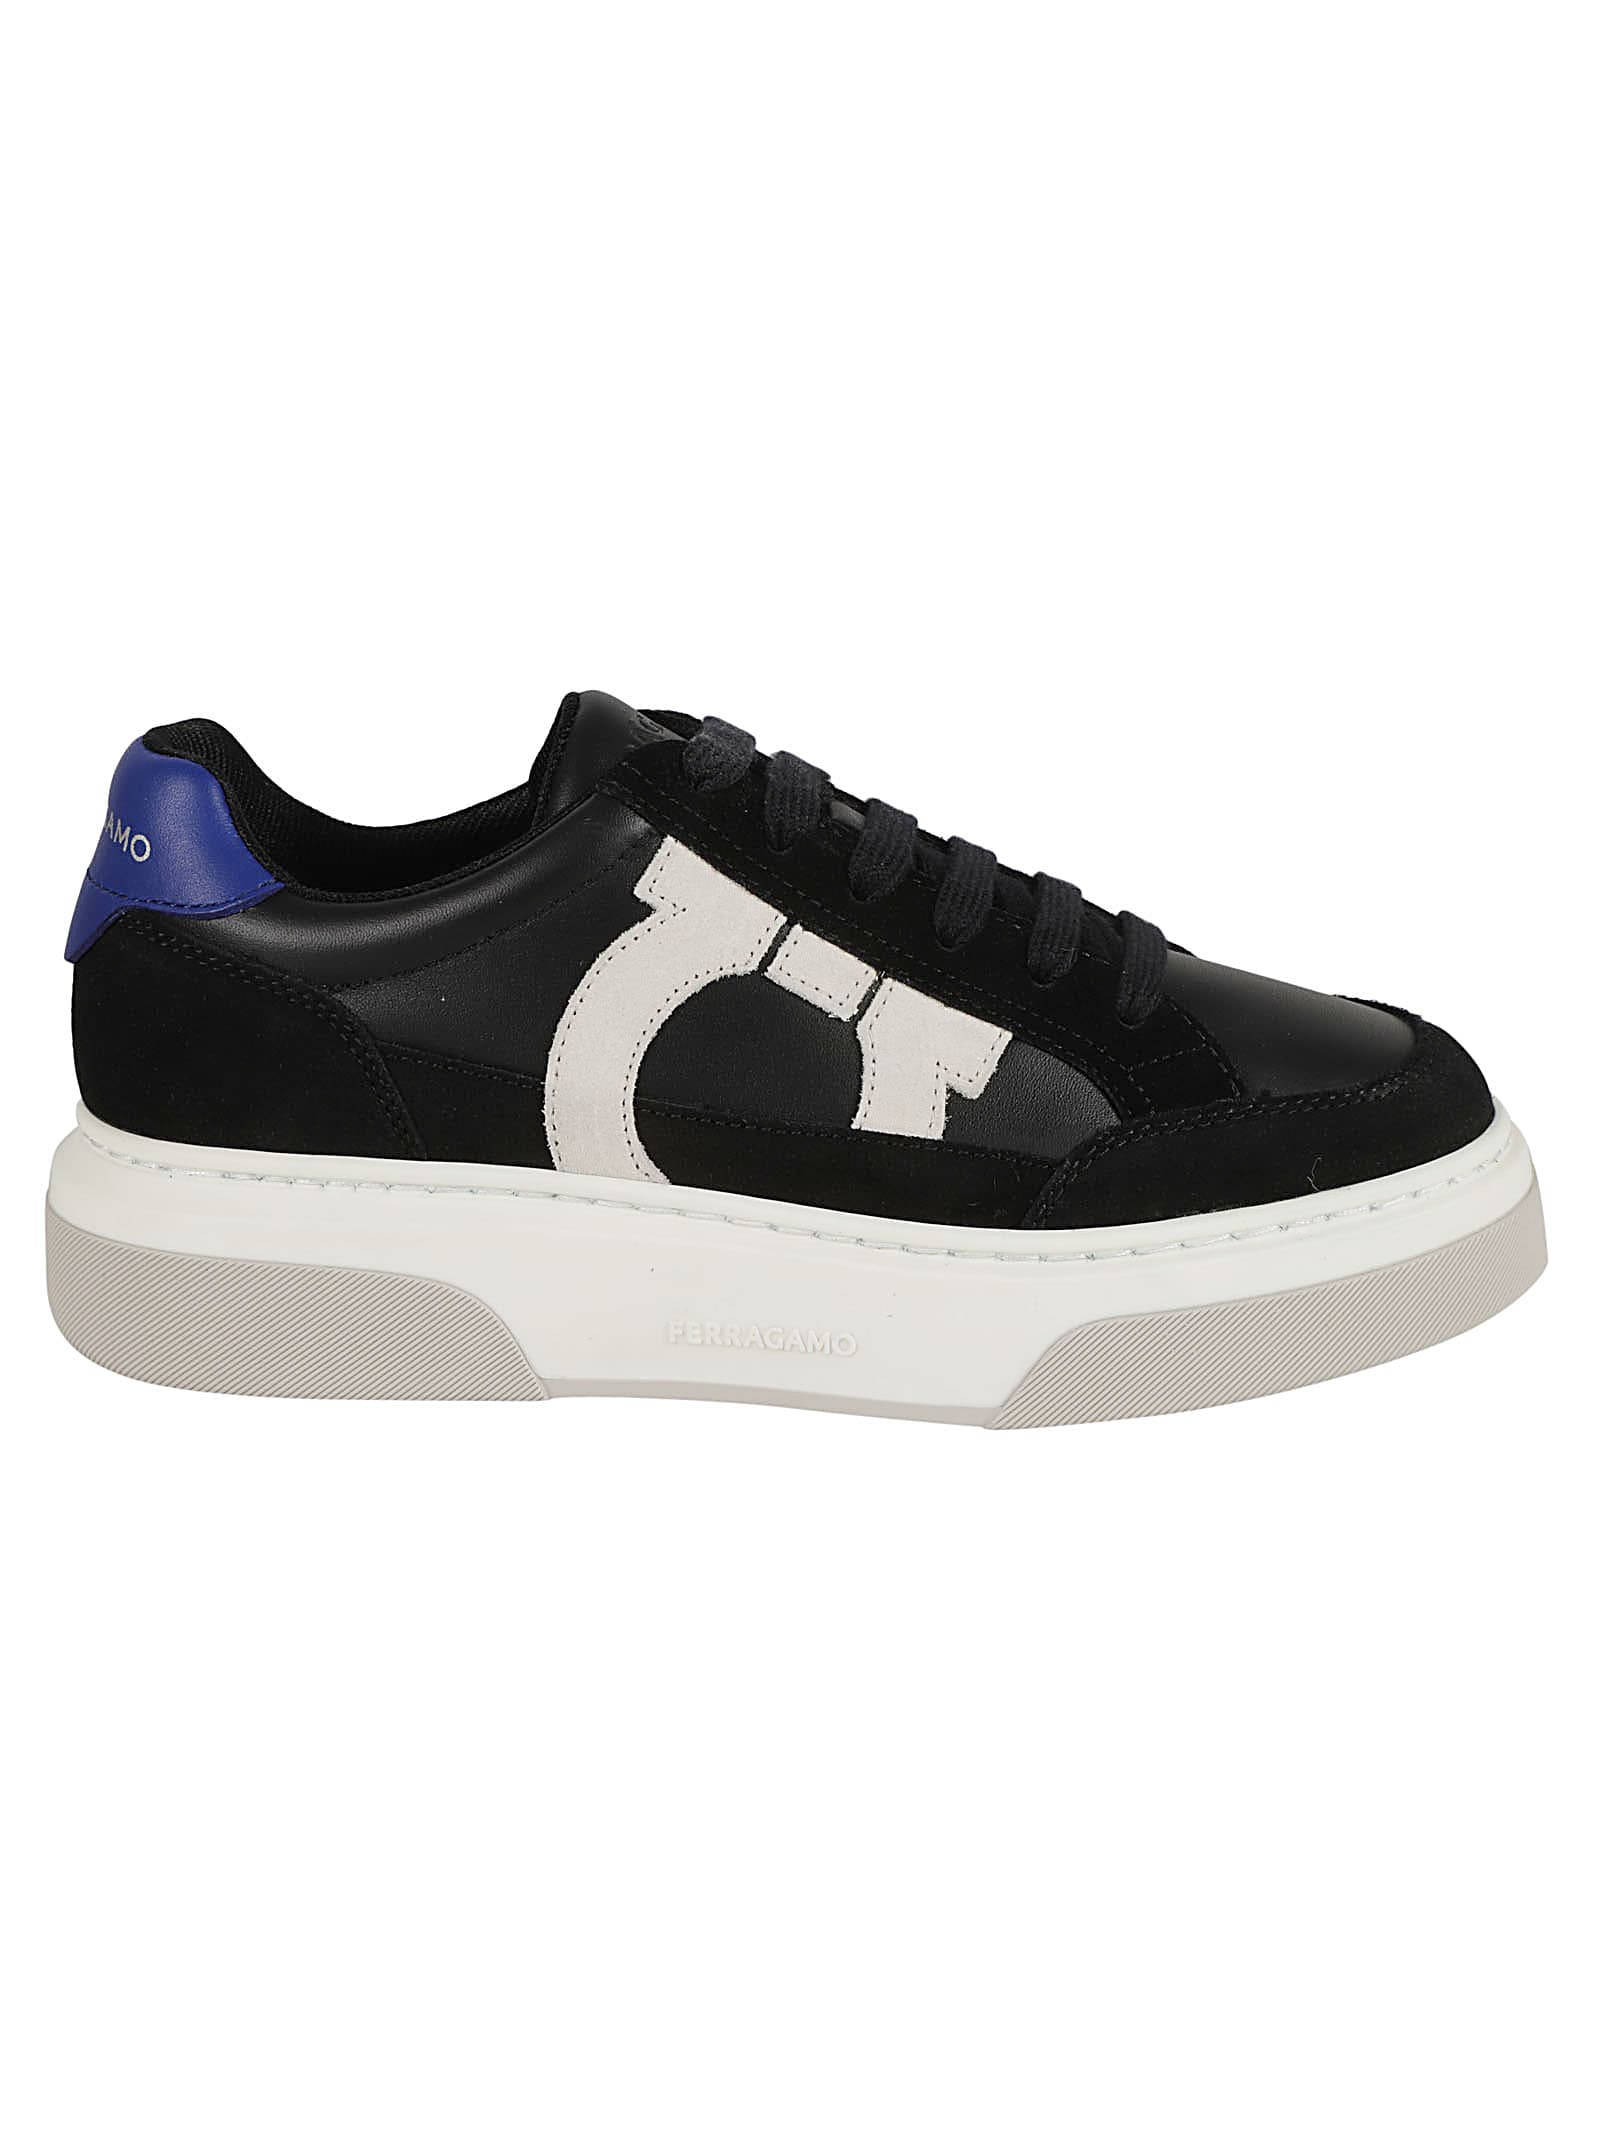 cassina Black Leather Blend Sneakers